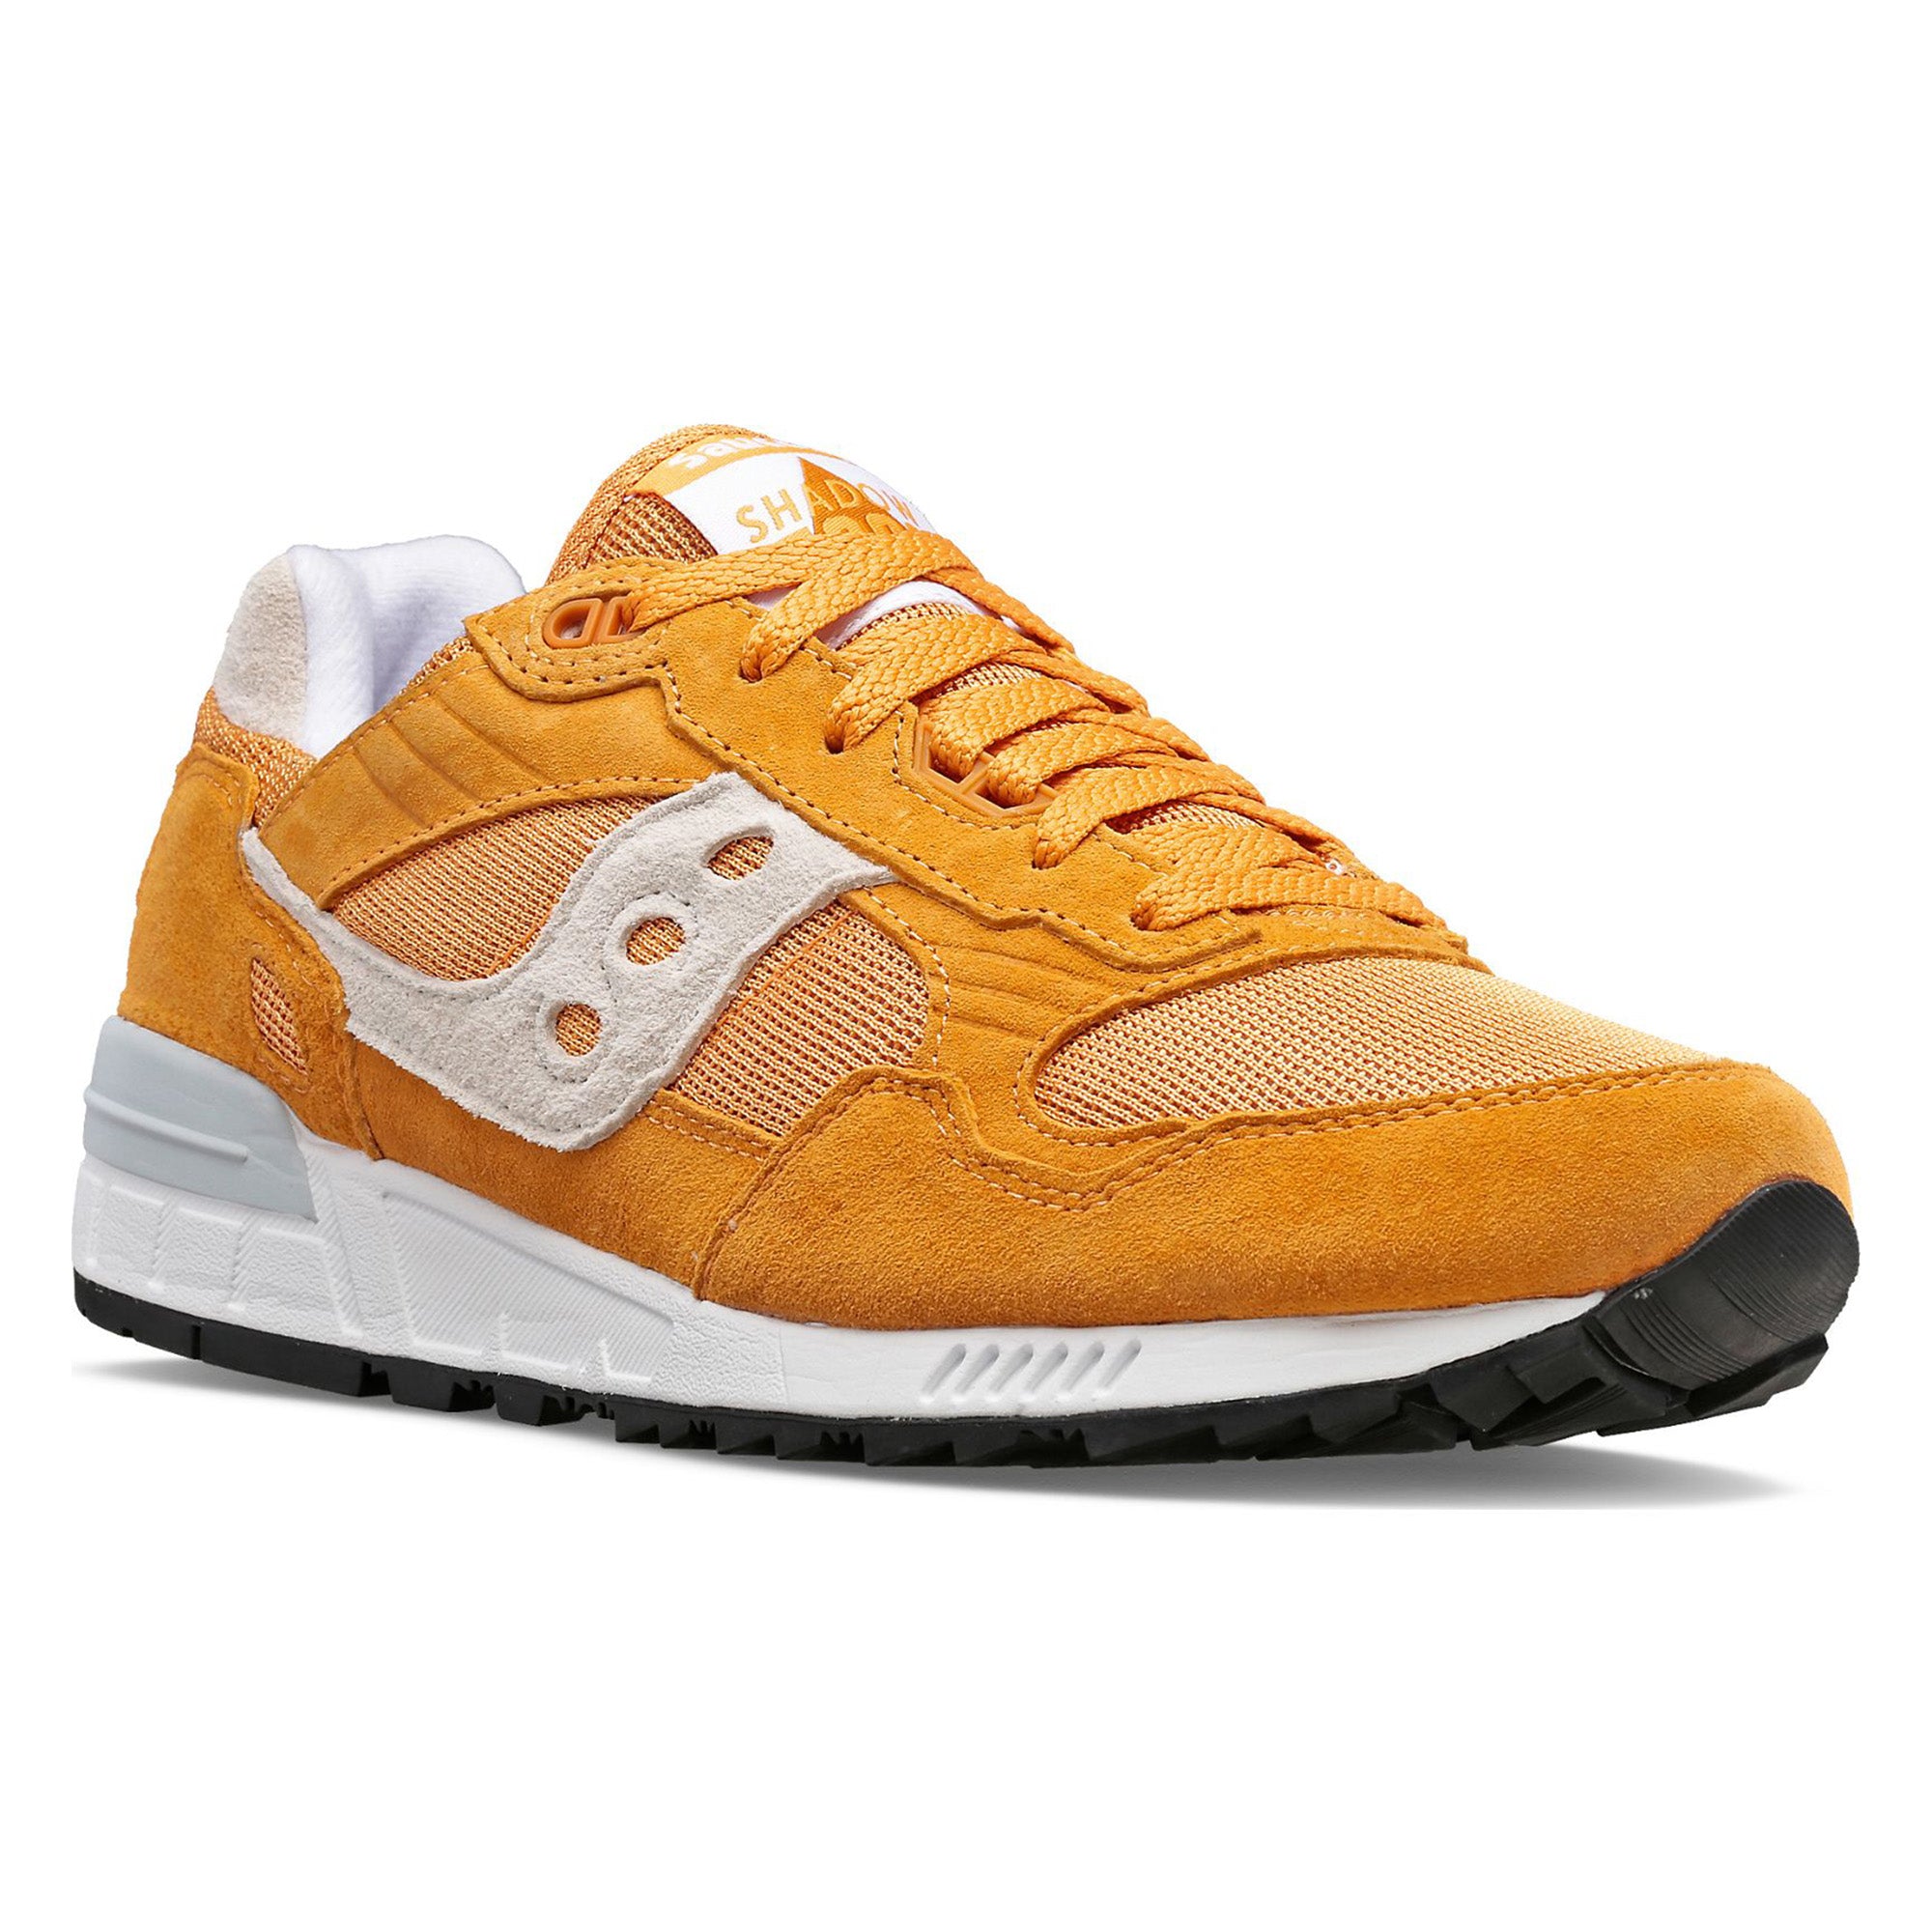 Saucony Shadow 5000 Trainers - Mustard